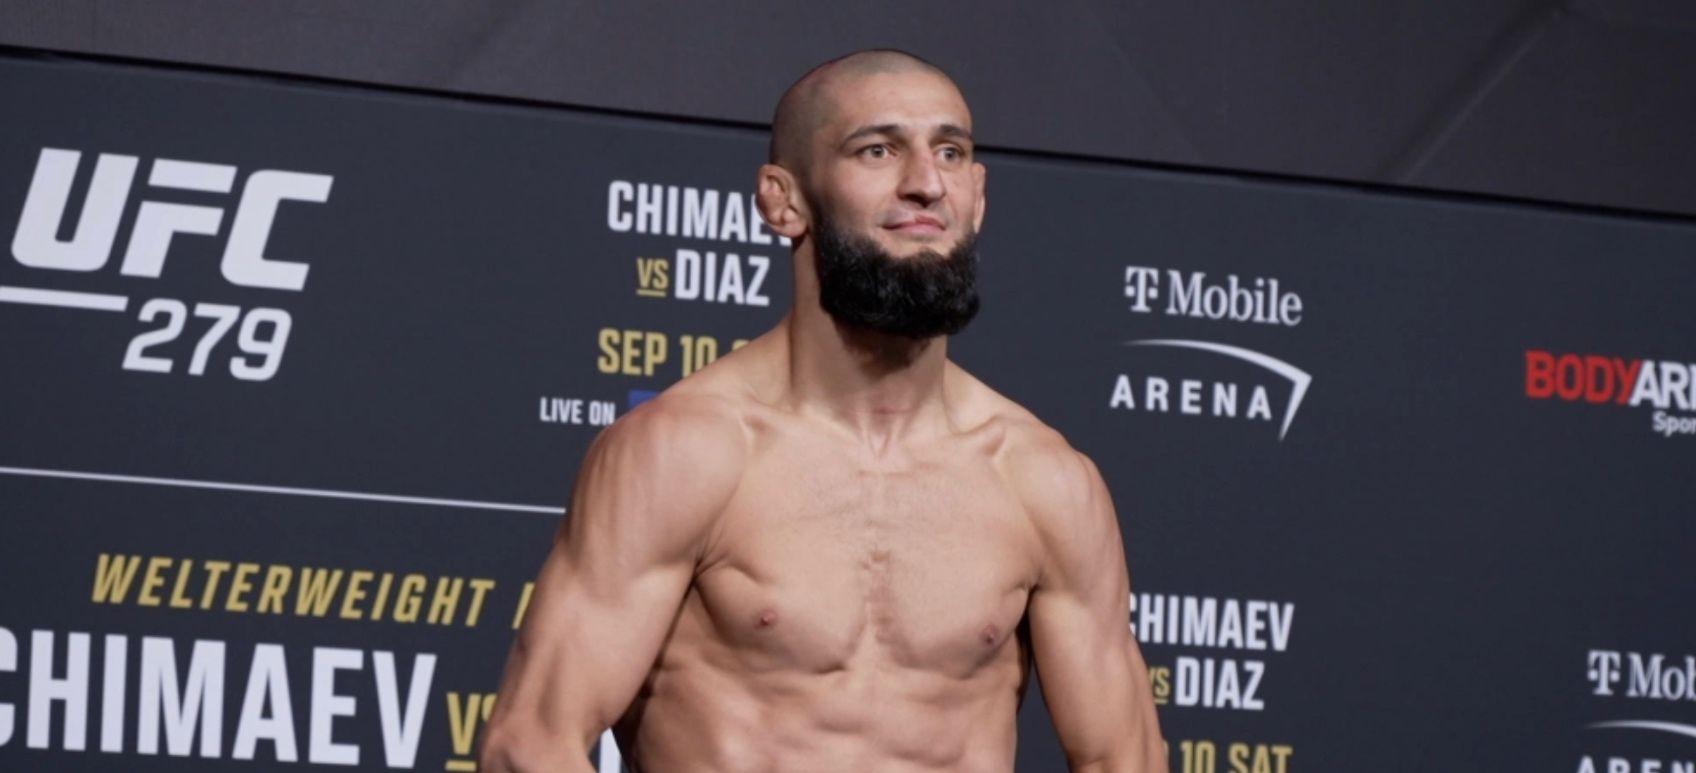 Khamzat Chimaev Misses Weight By Record Amount, Fight vs. Diaz in Jeopardy